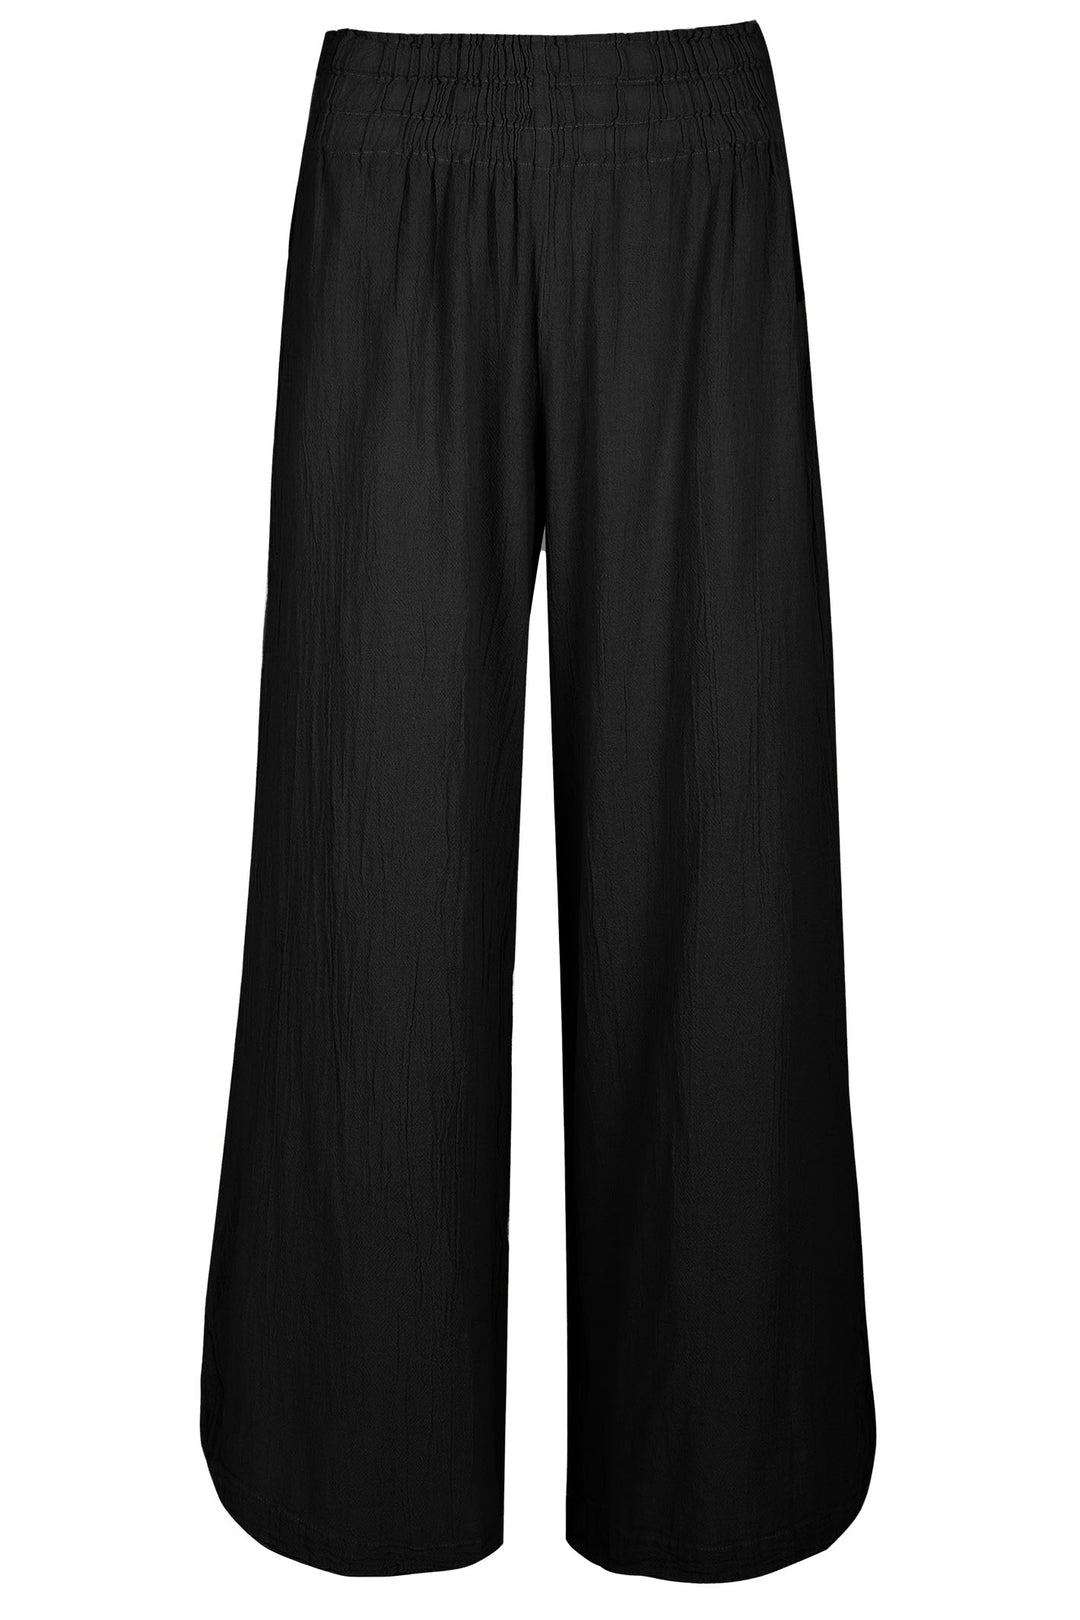 Onelife P609 Opalo Black Wide Leg Flared Trousers - Experience Boutique